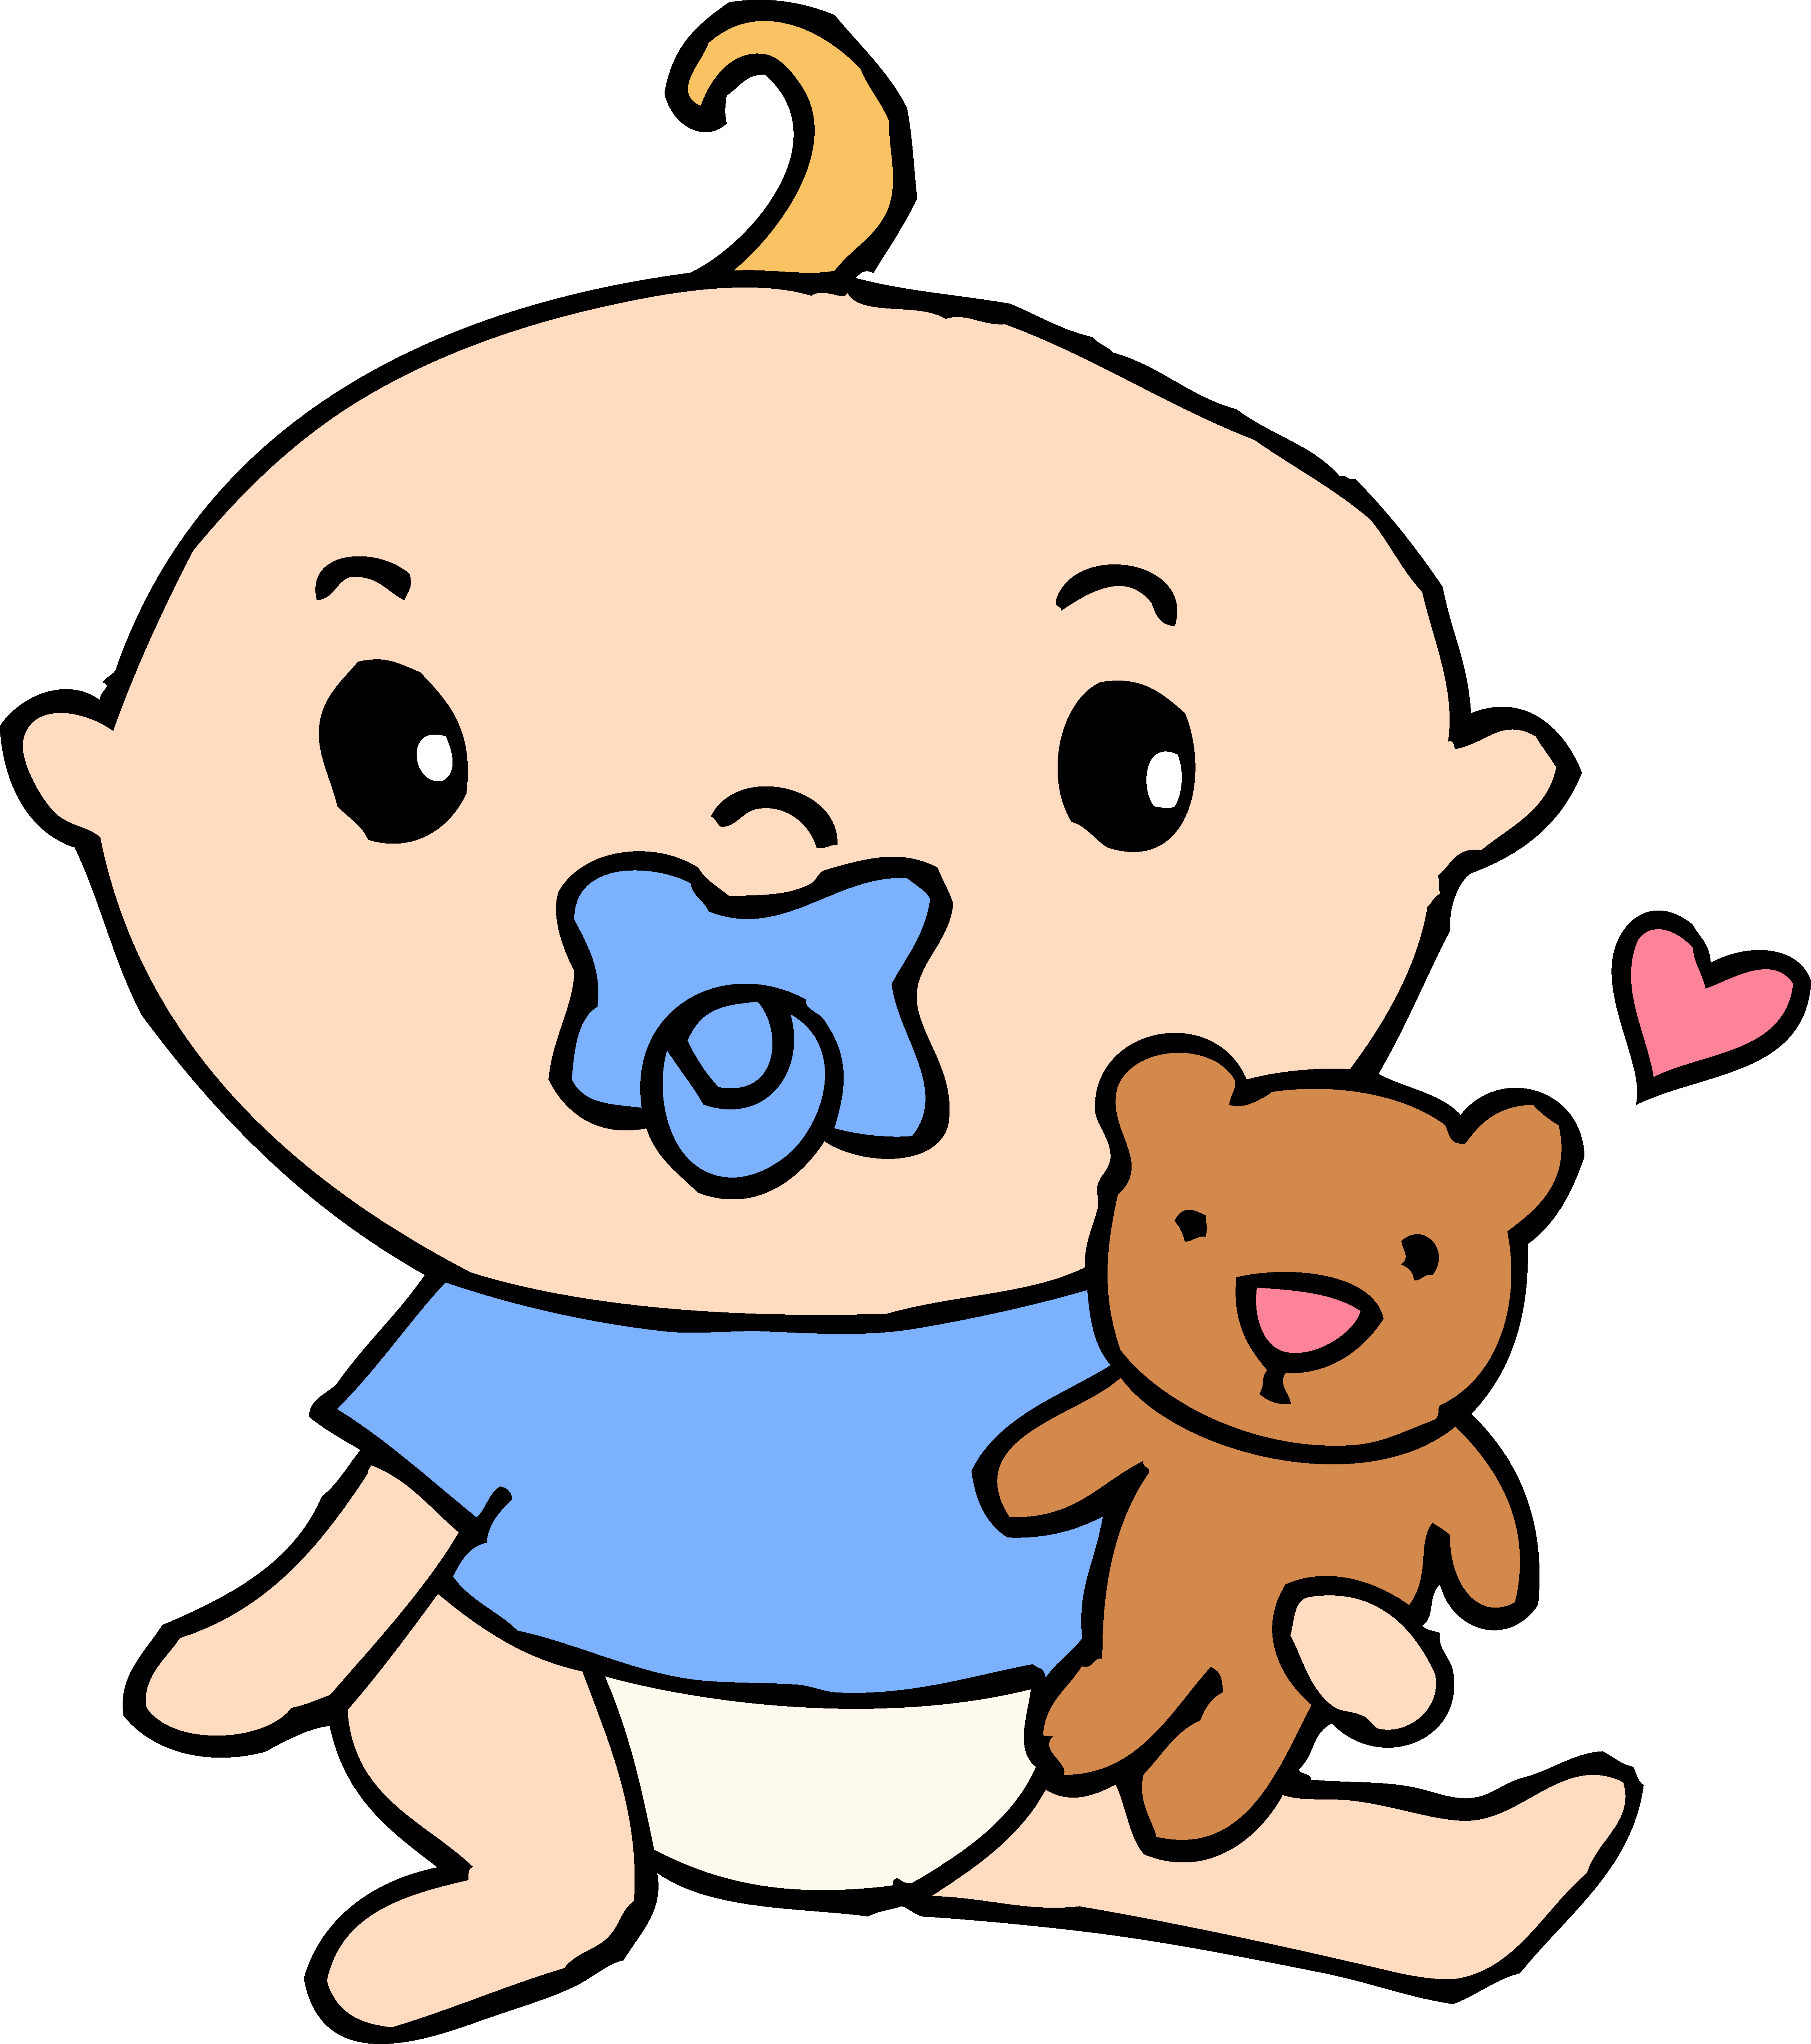 933 Pacifier free clipart.